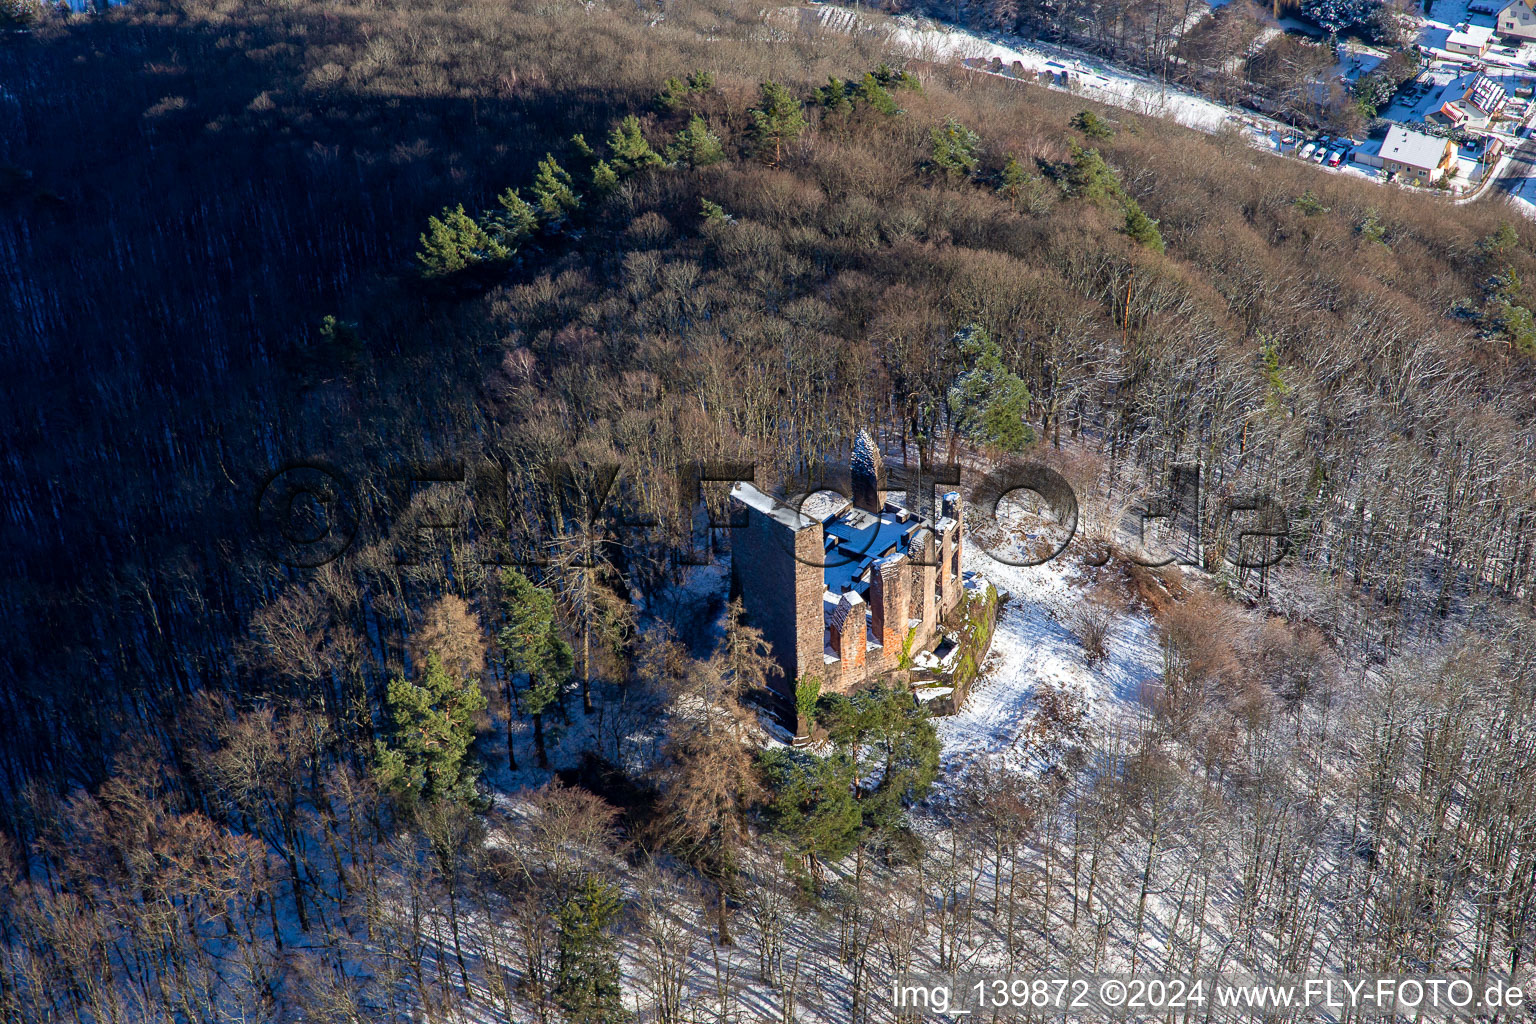 Ramburg castle ruins in winter with snow in Ramberg in the state Rhineland-Palatinate, Germany from the plane